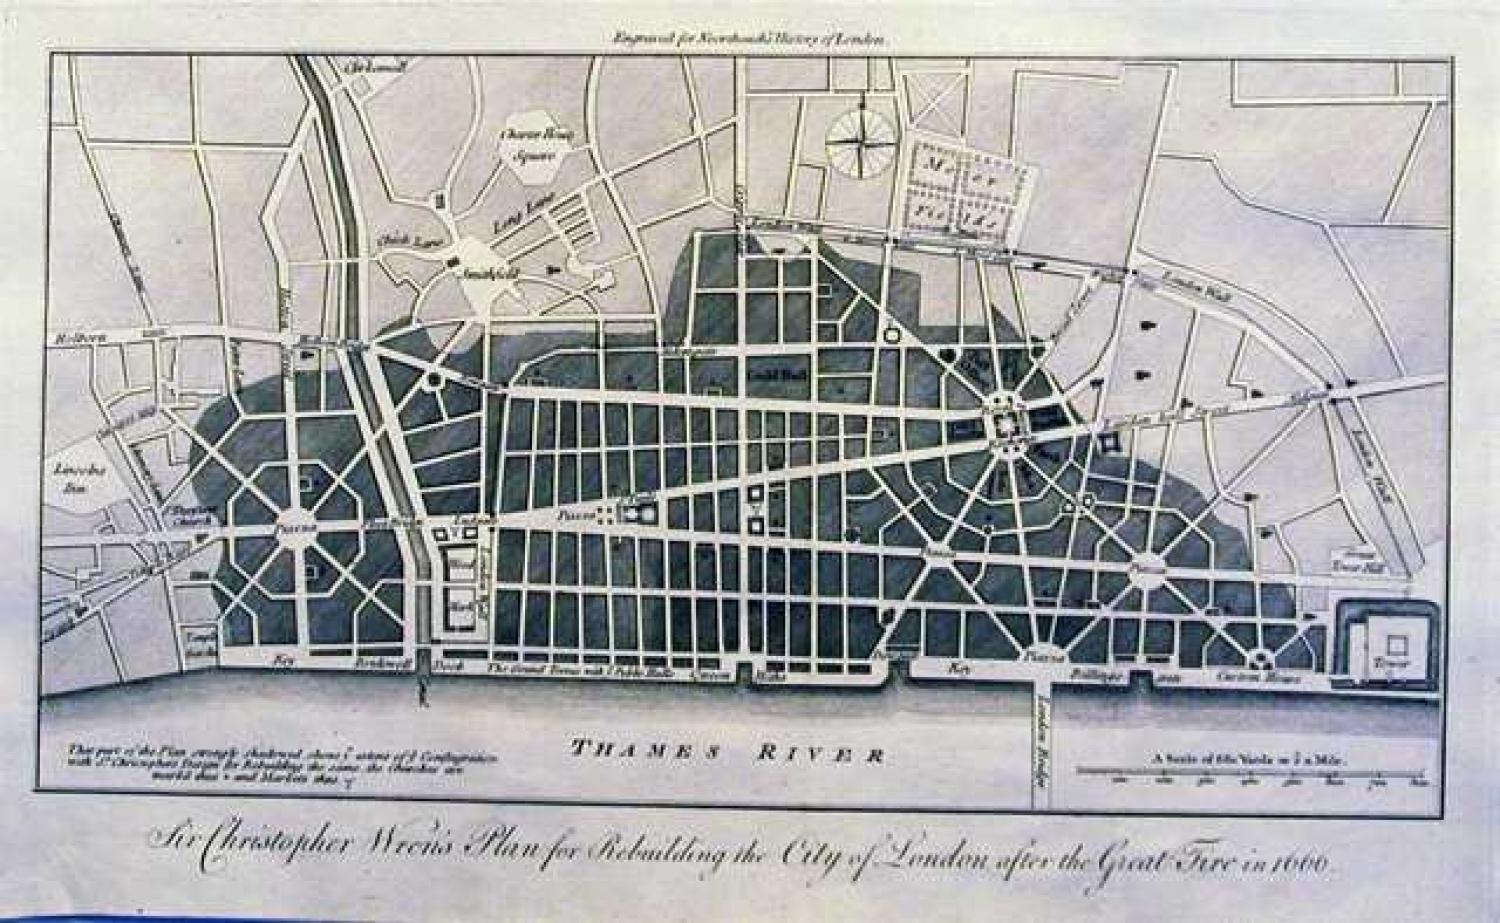 SOLD Sir Christopher Wren's plan for rebuilding the City of London after the great fire in 1666